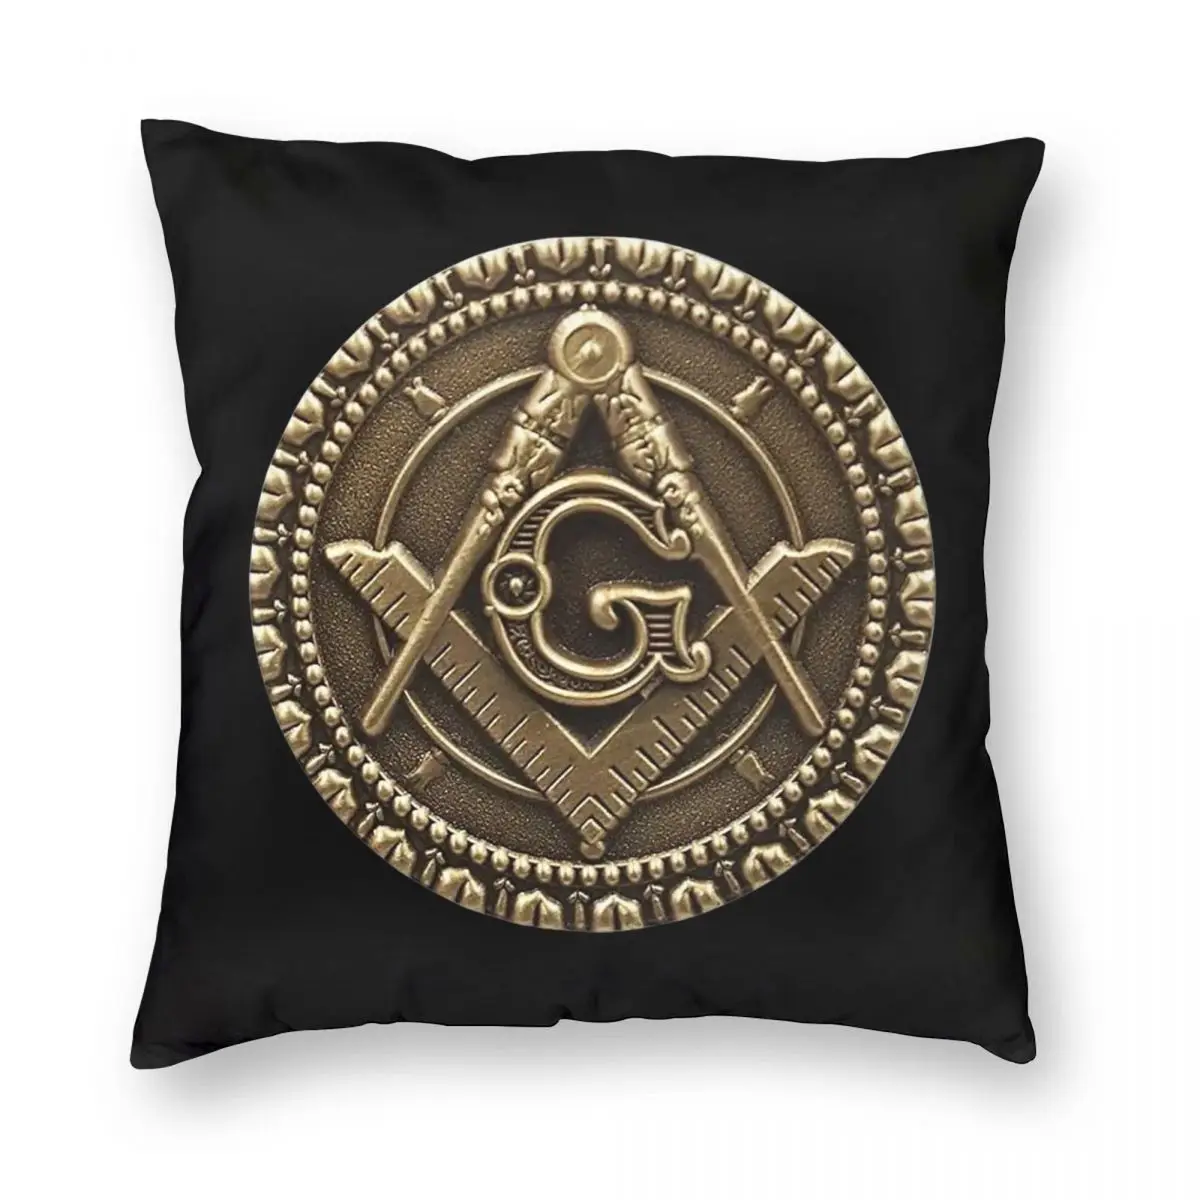 

Freemasons Square And Compass Design Pillowcase Printing Cushion Cover Decorative Pillow Case Cover Home Zippered 45*45cm